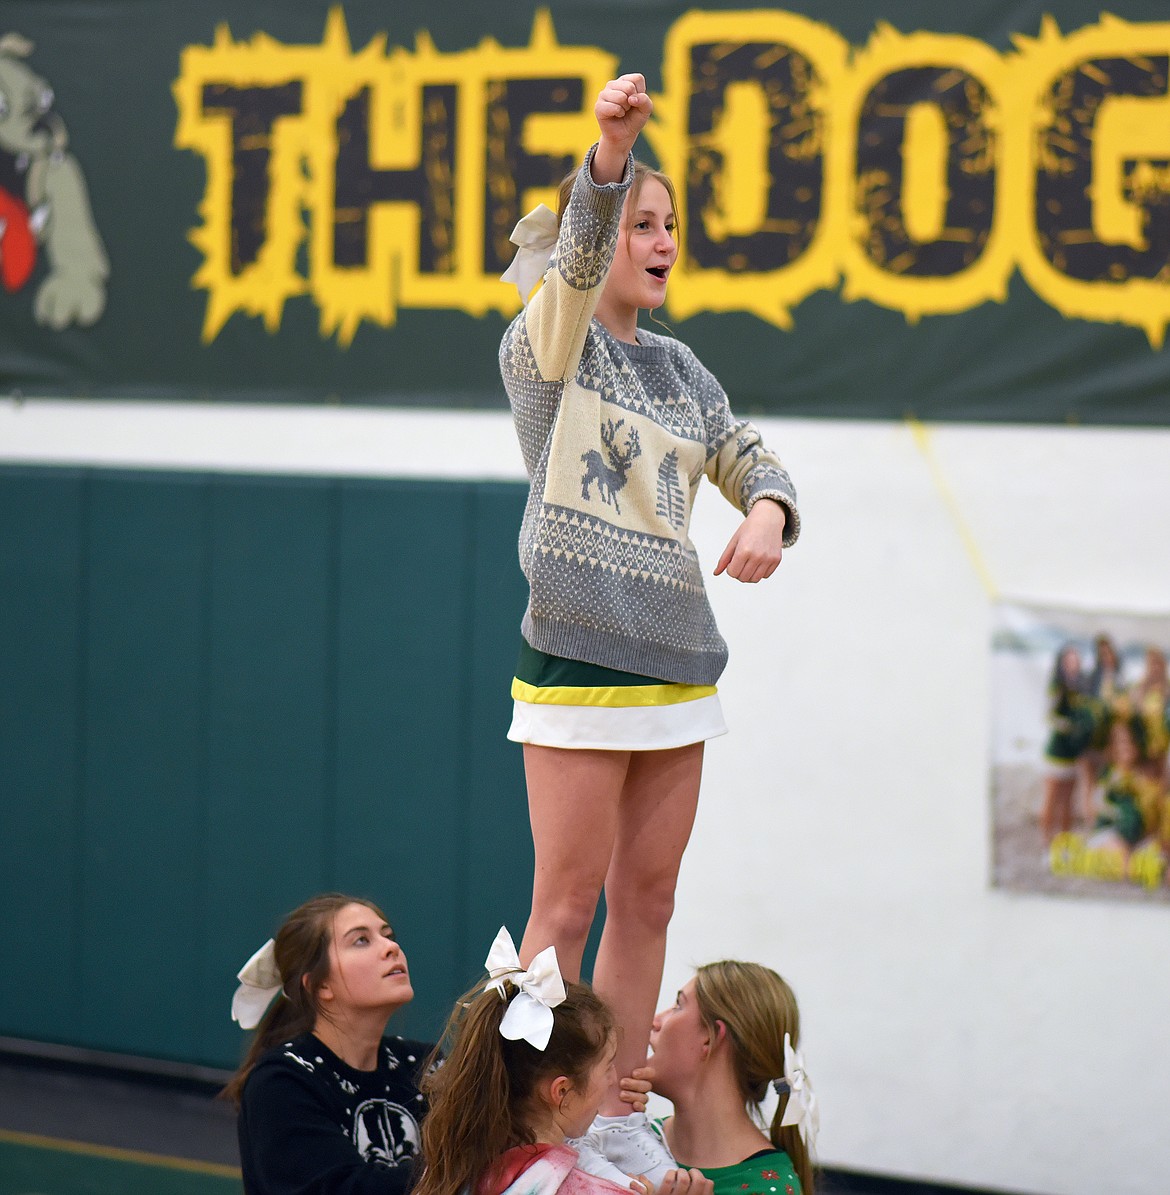 Whitefish cheerleader Lucy Olson leads a cheer, with support from Alie Simpson, Hanna Gawe and Ashlyn Morse, at a recent basketball game at Whitefish High School. (Whitney England/Whitefish Pilot)